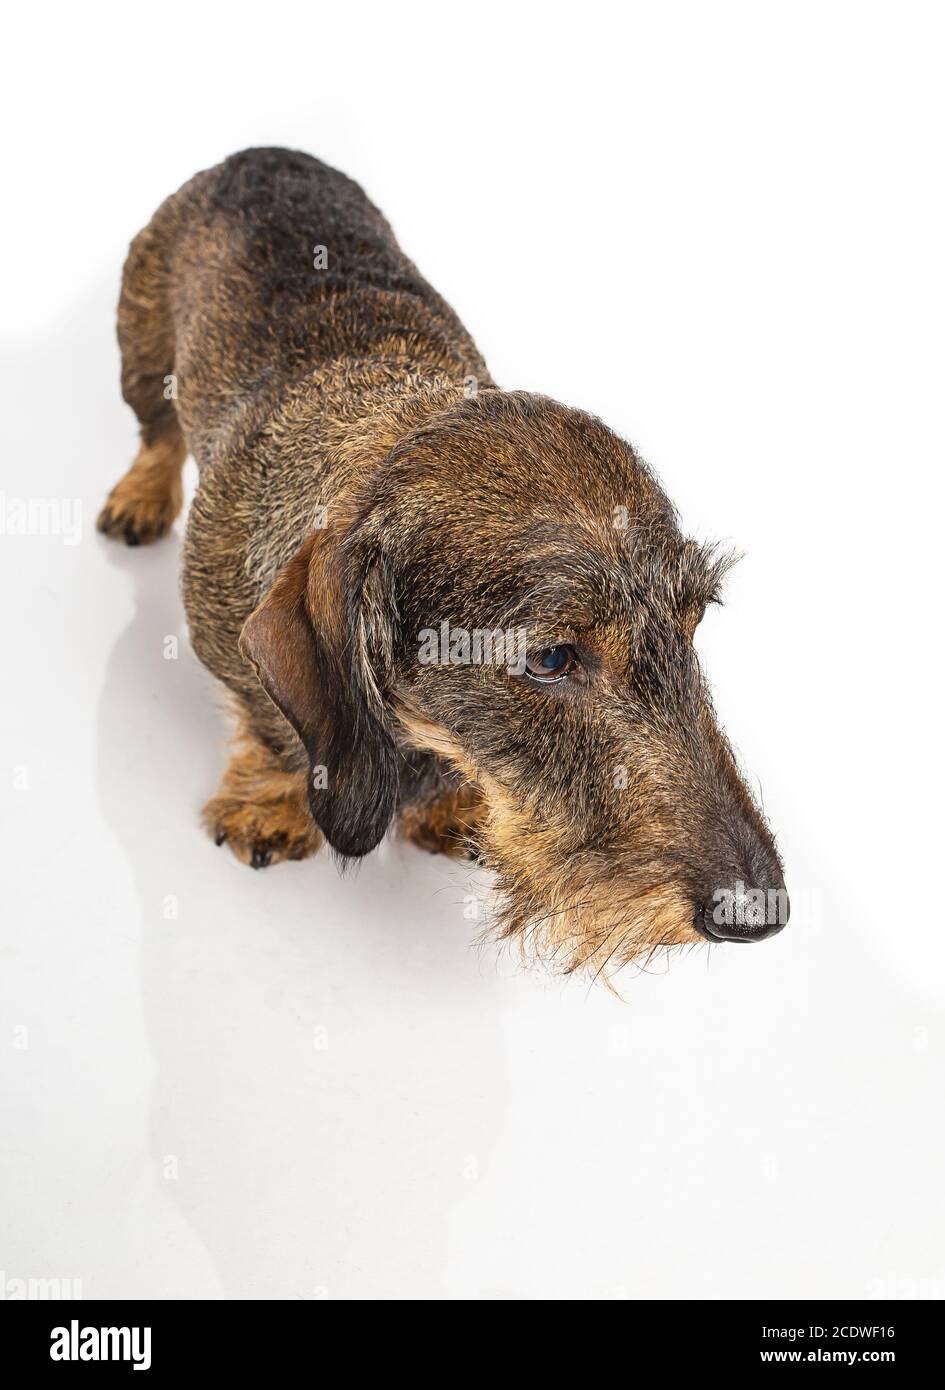 Curious wiener dog Stock Photo